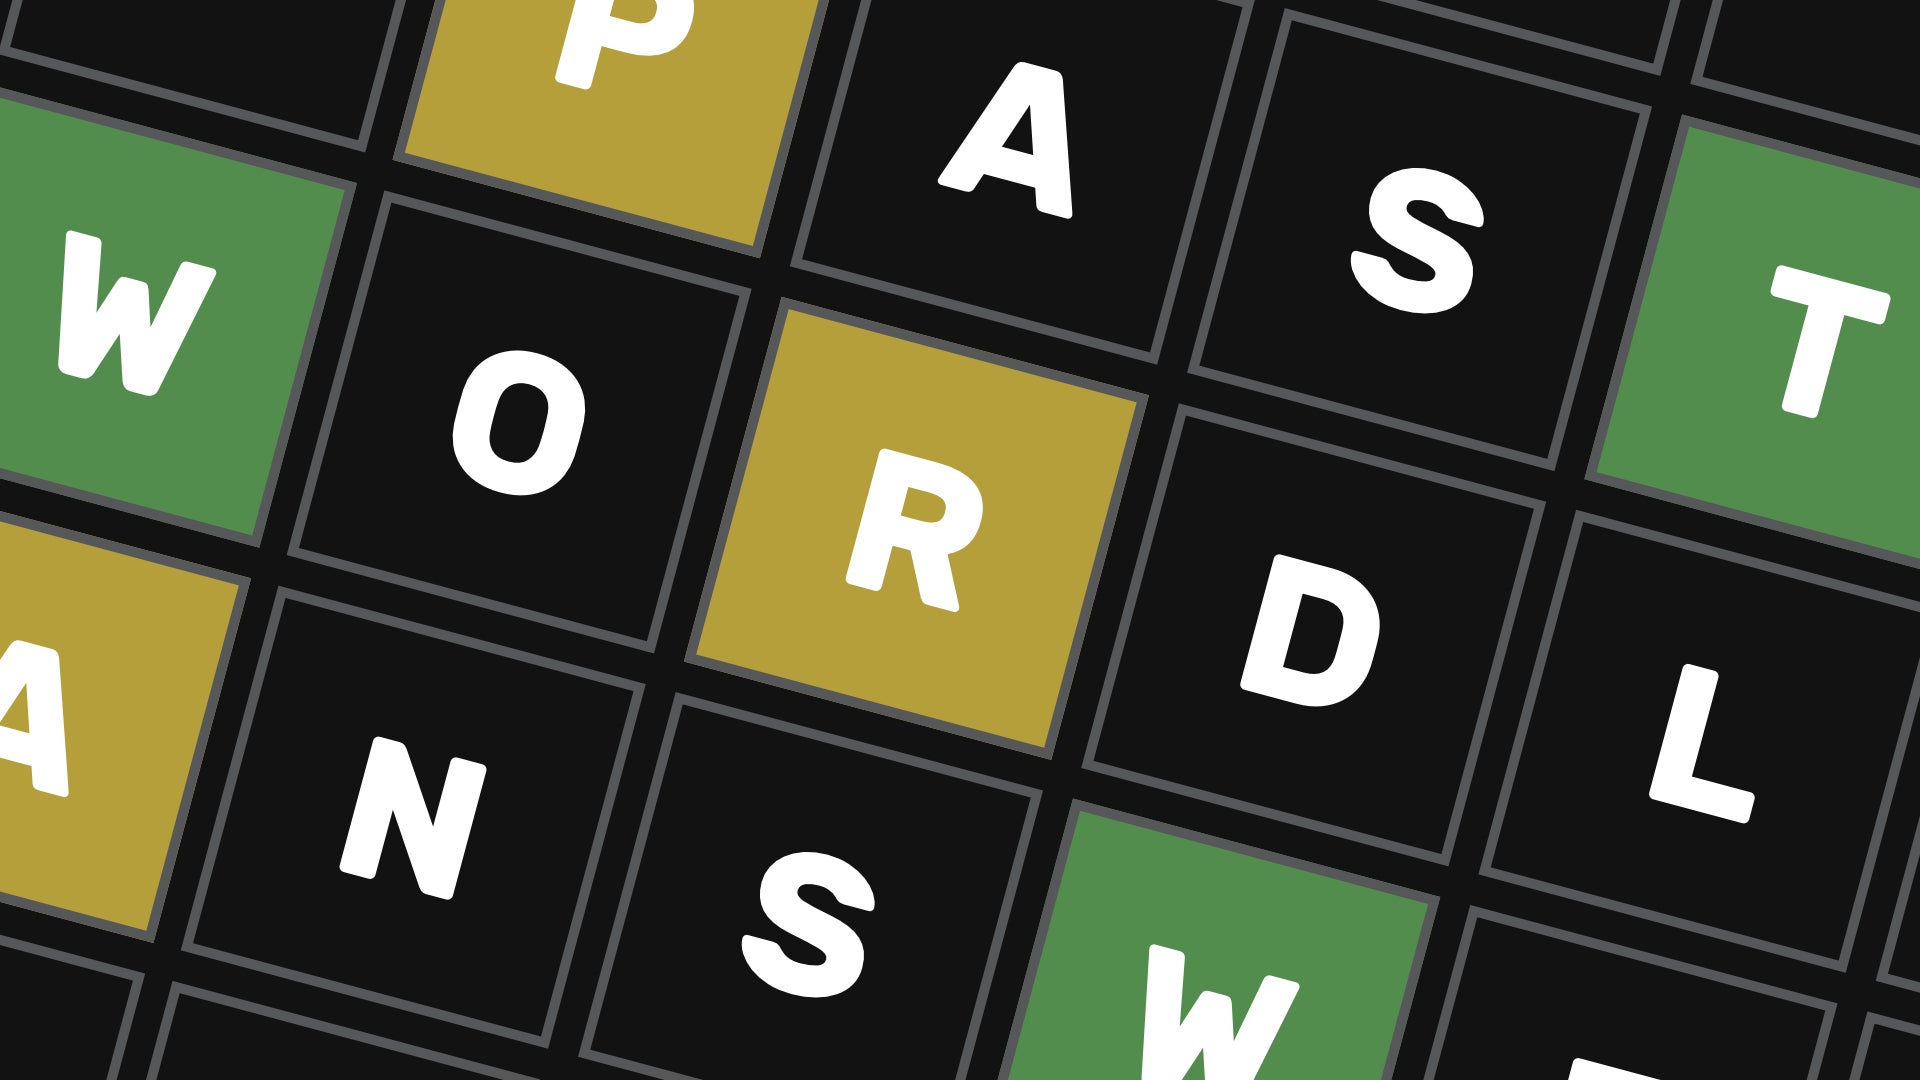 A close-up of part of a Wordle grid. The letters spell "past wordle answers".